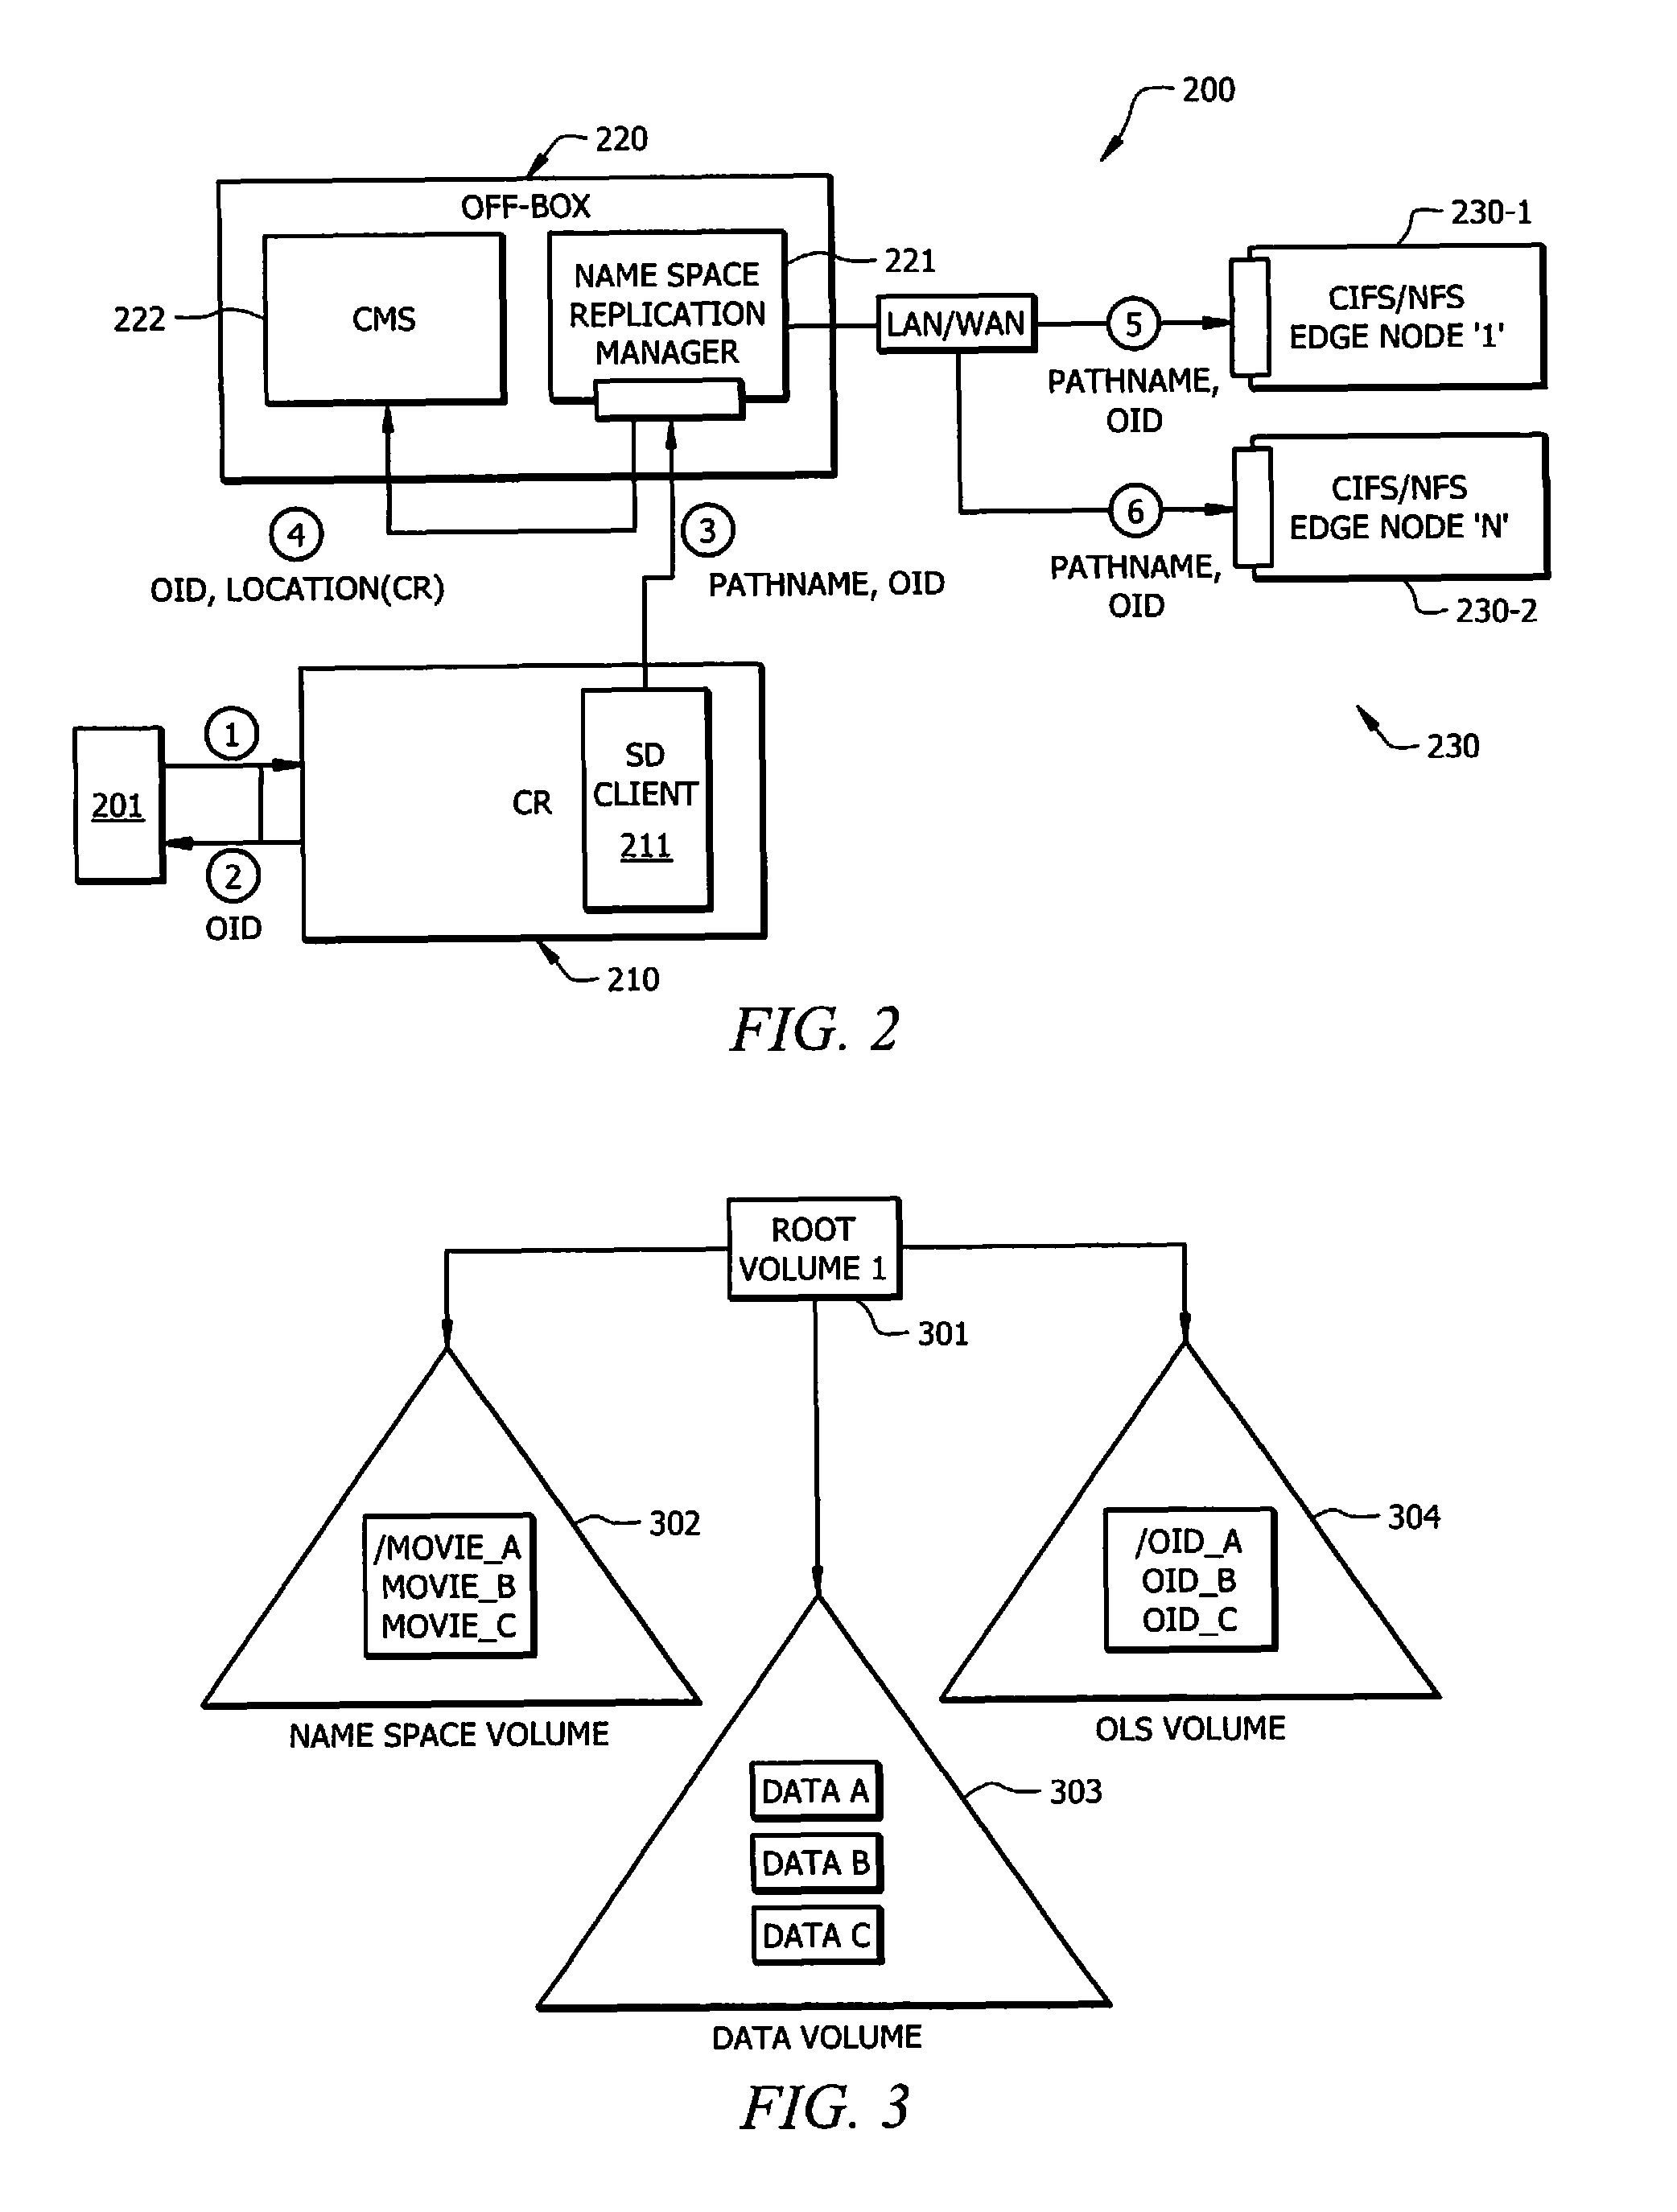 Method and system for name space propagation and file caching to remote nodes in a storage system